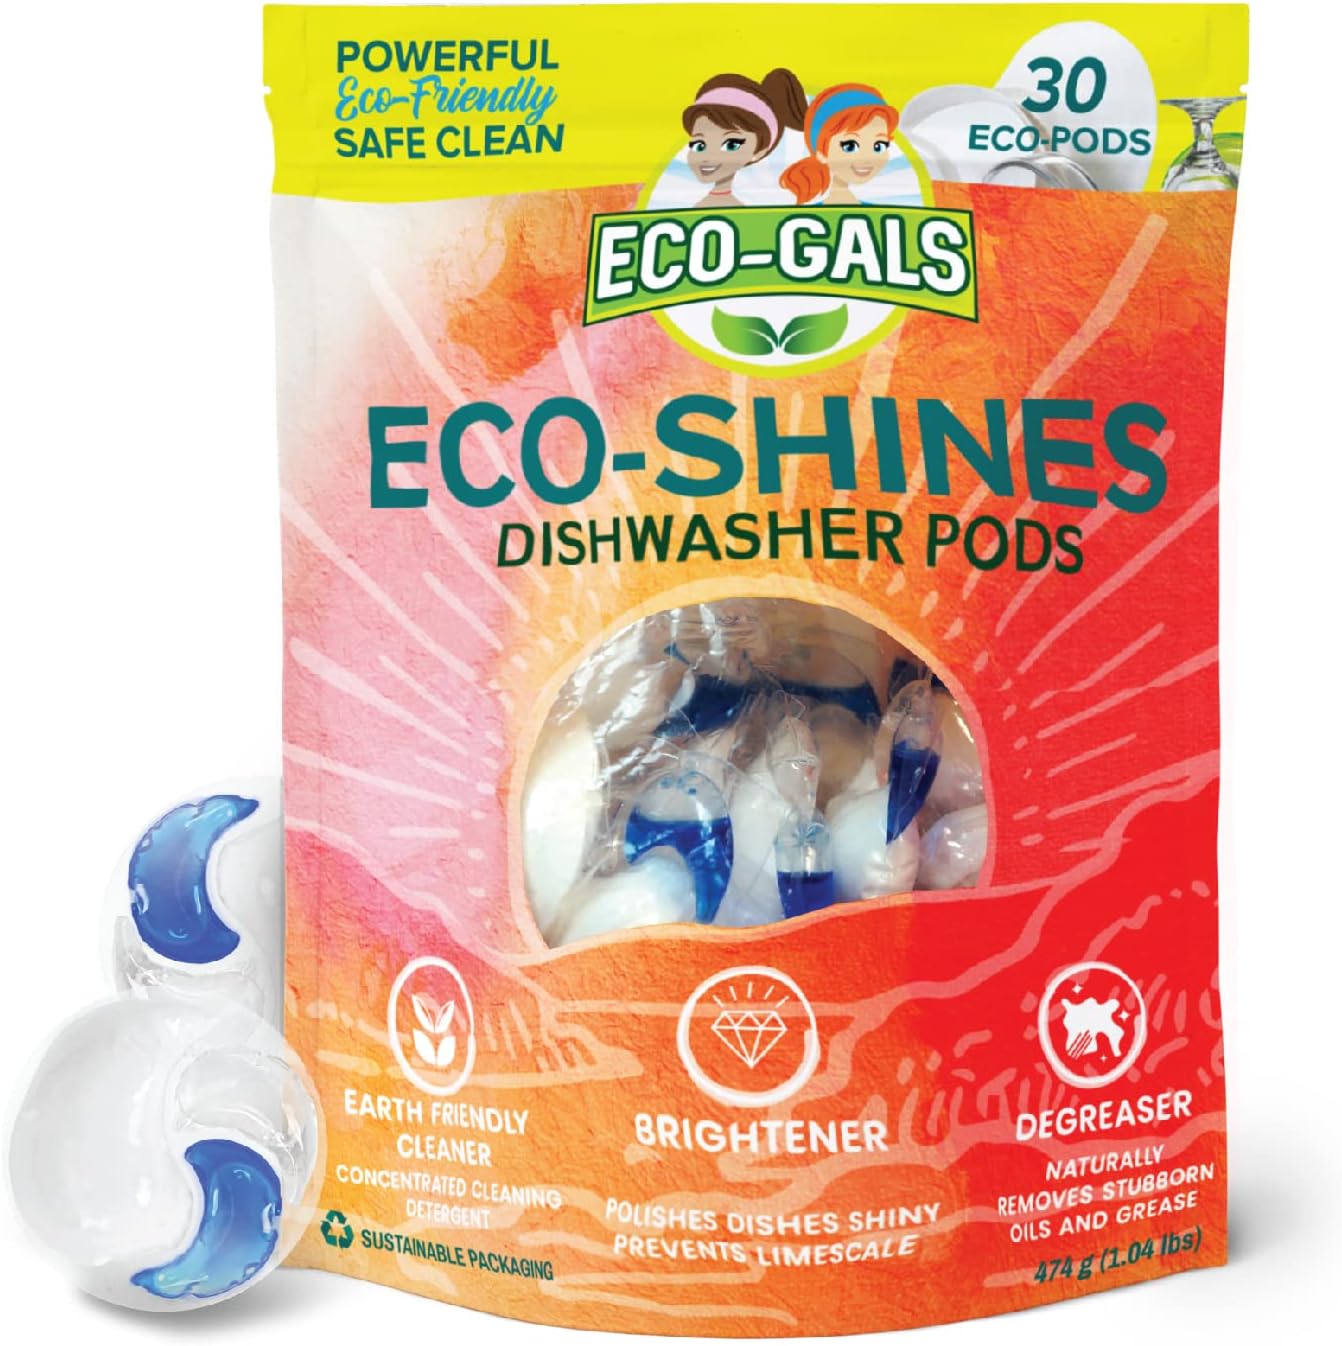 Eco-Shines Dishwasher Detergent Pods With 3 in 1 Power of Liquid, Powder, and Gel for Brighter Cleaner Dishes